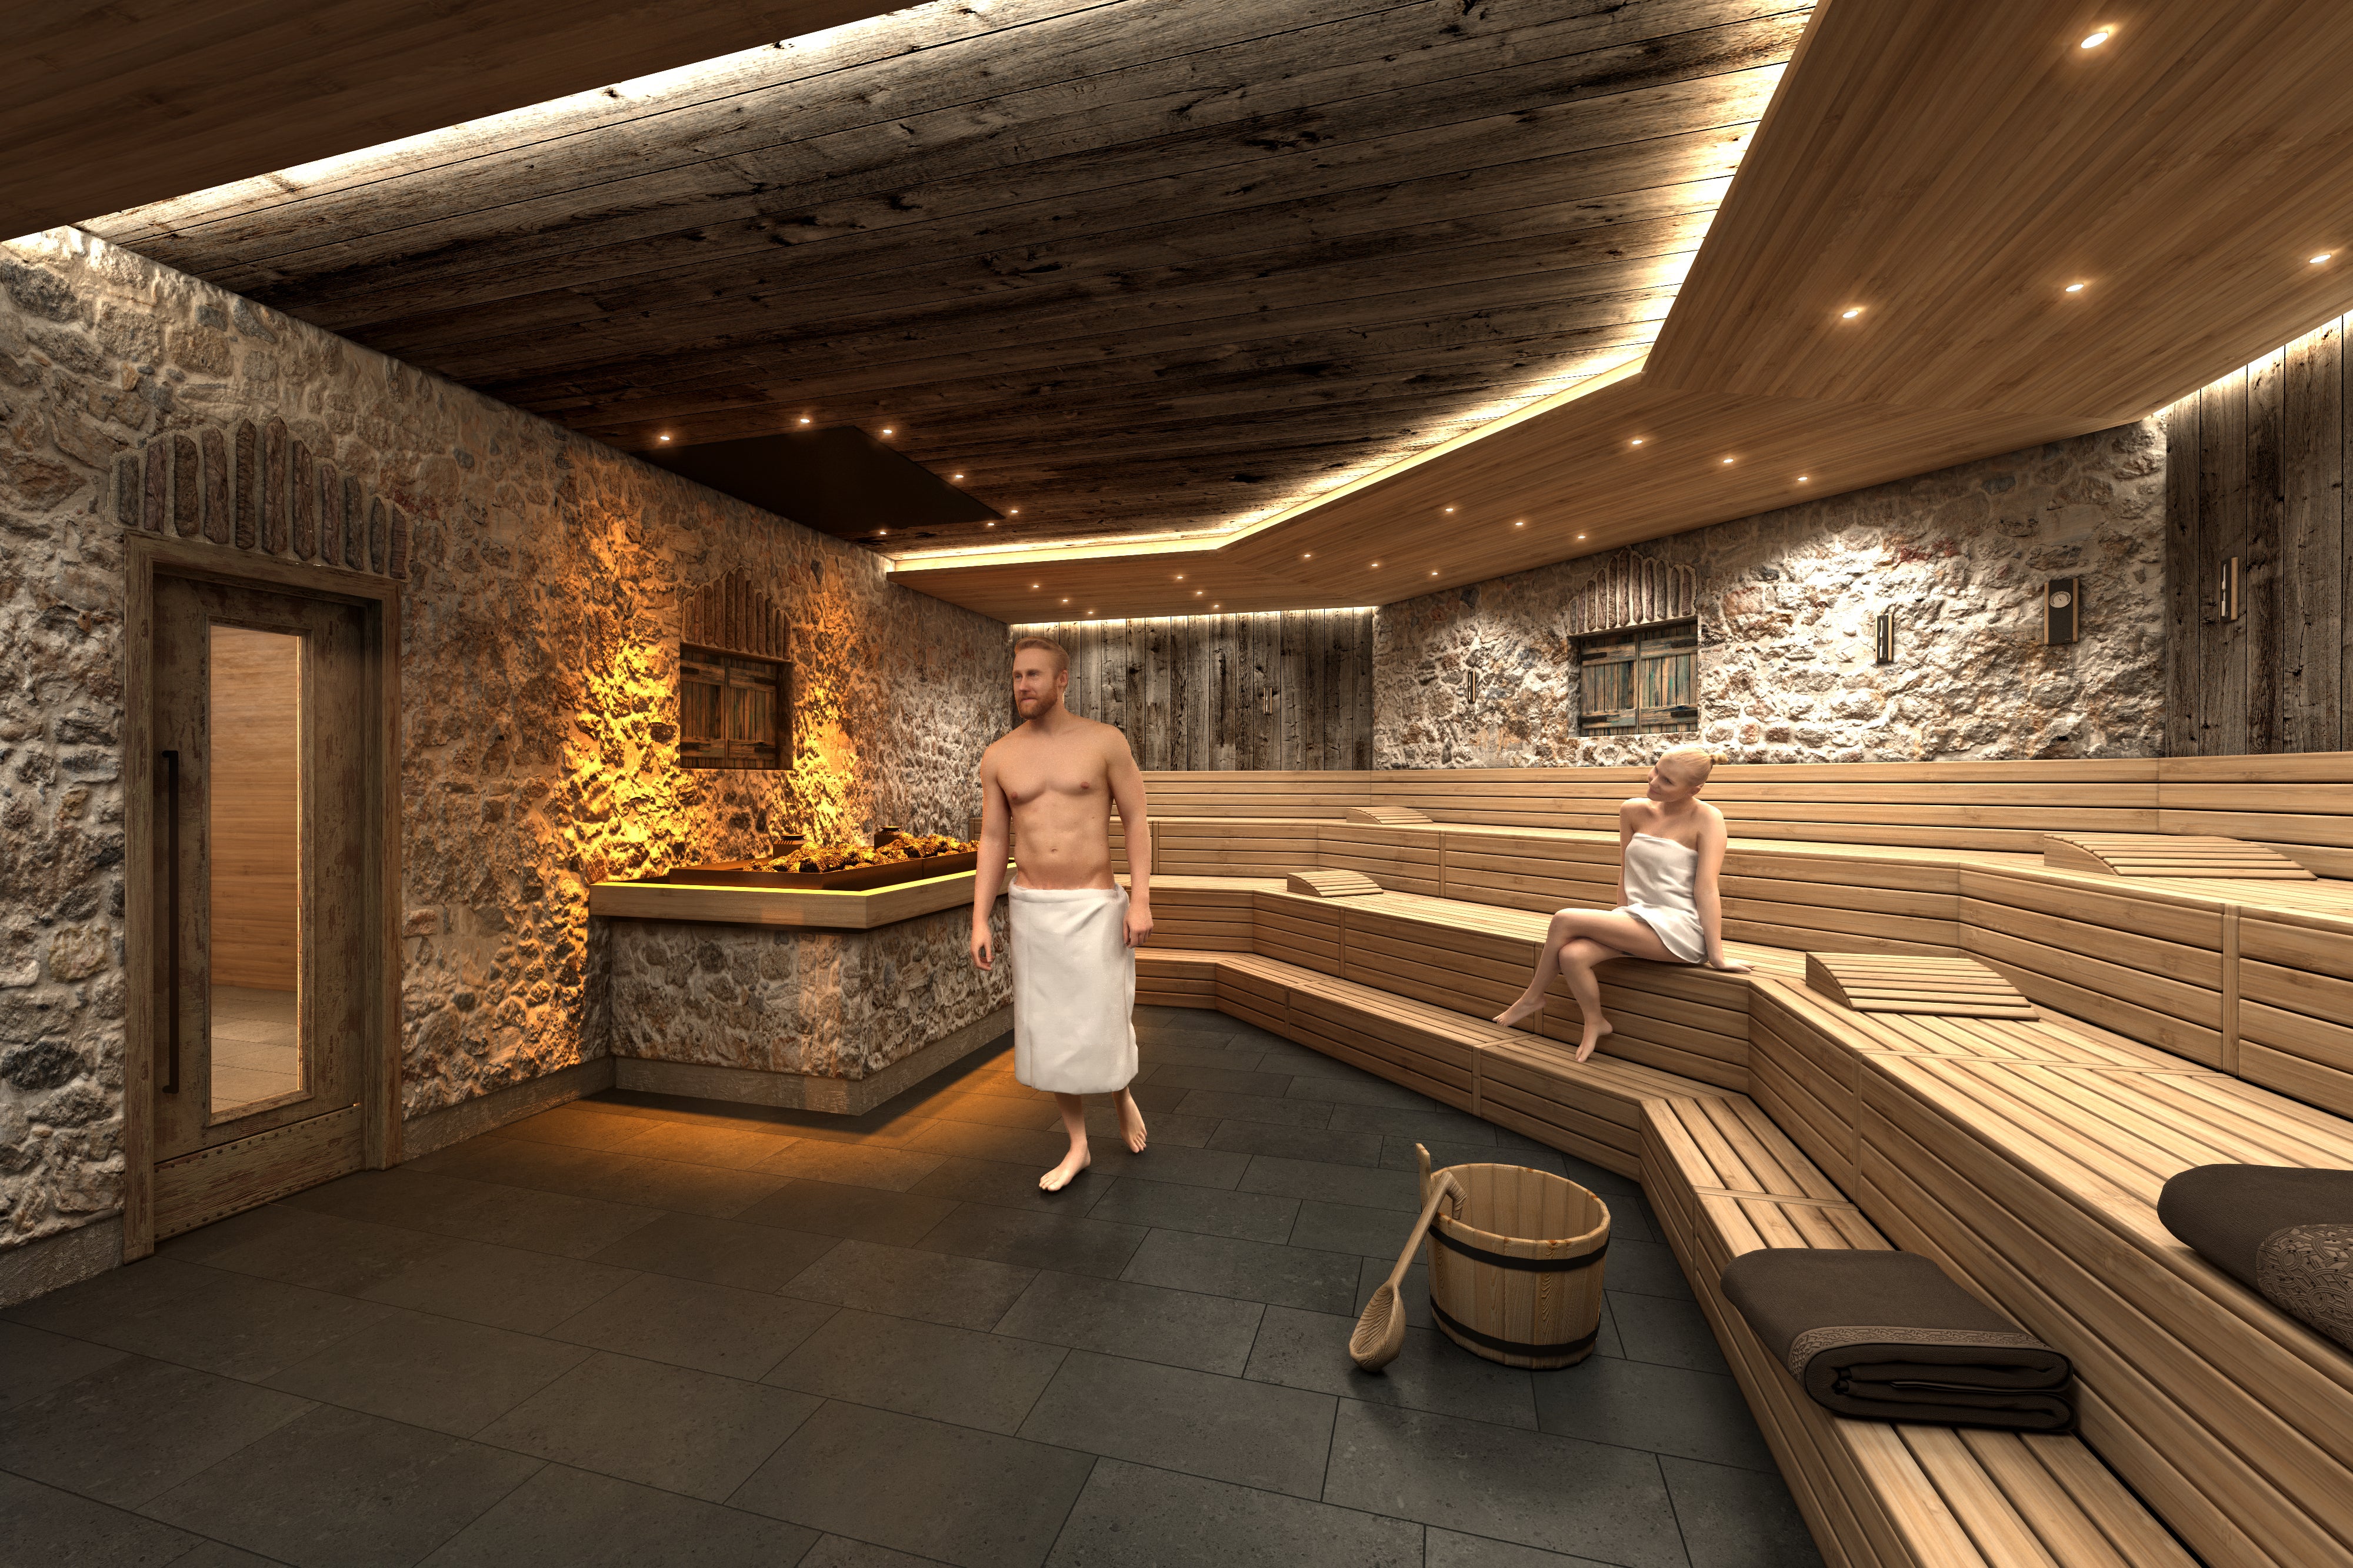 Relax, repair and restore in the thermal baths, saunas and pools at the Silvretta Spa